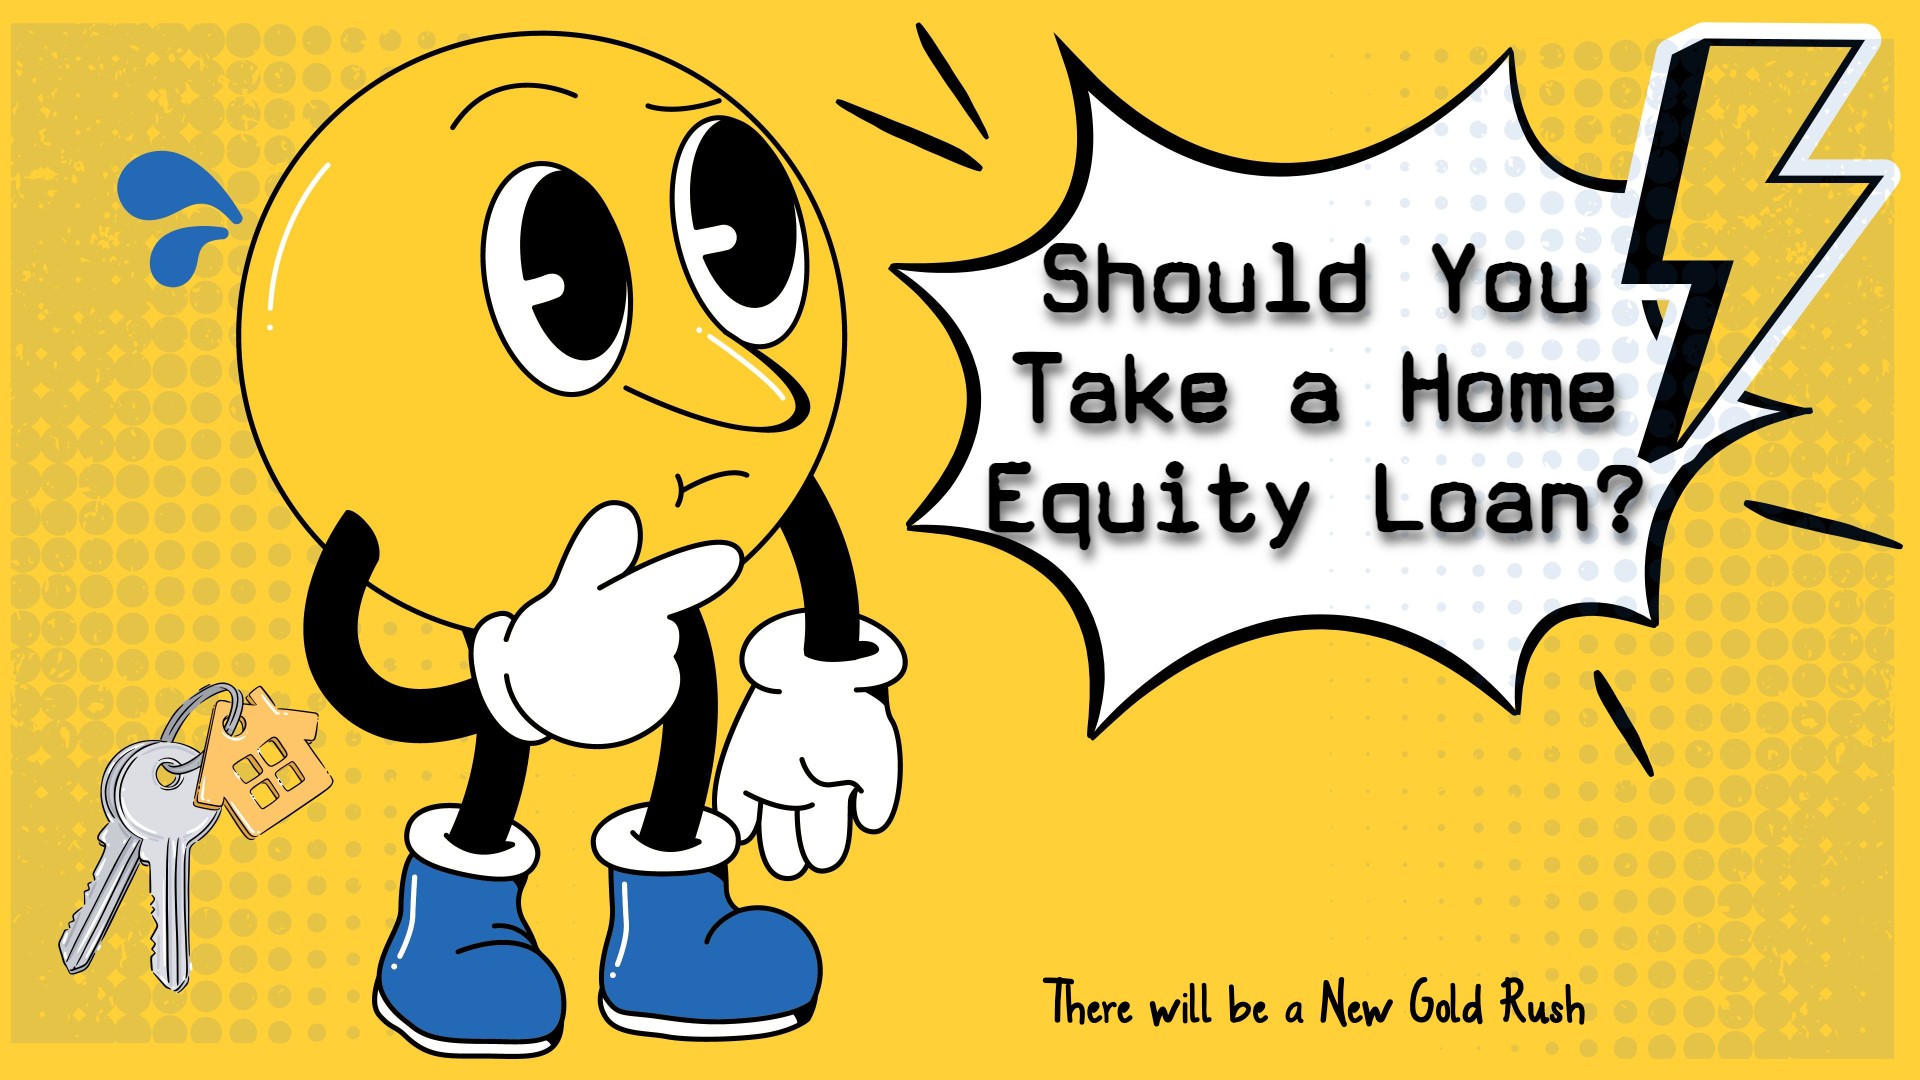 Should You Take a Home Equity Loan? There Will Be a New Gold Rush